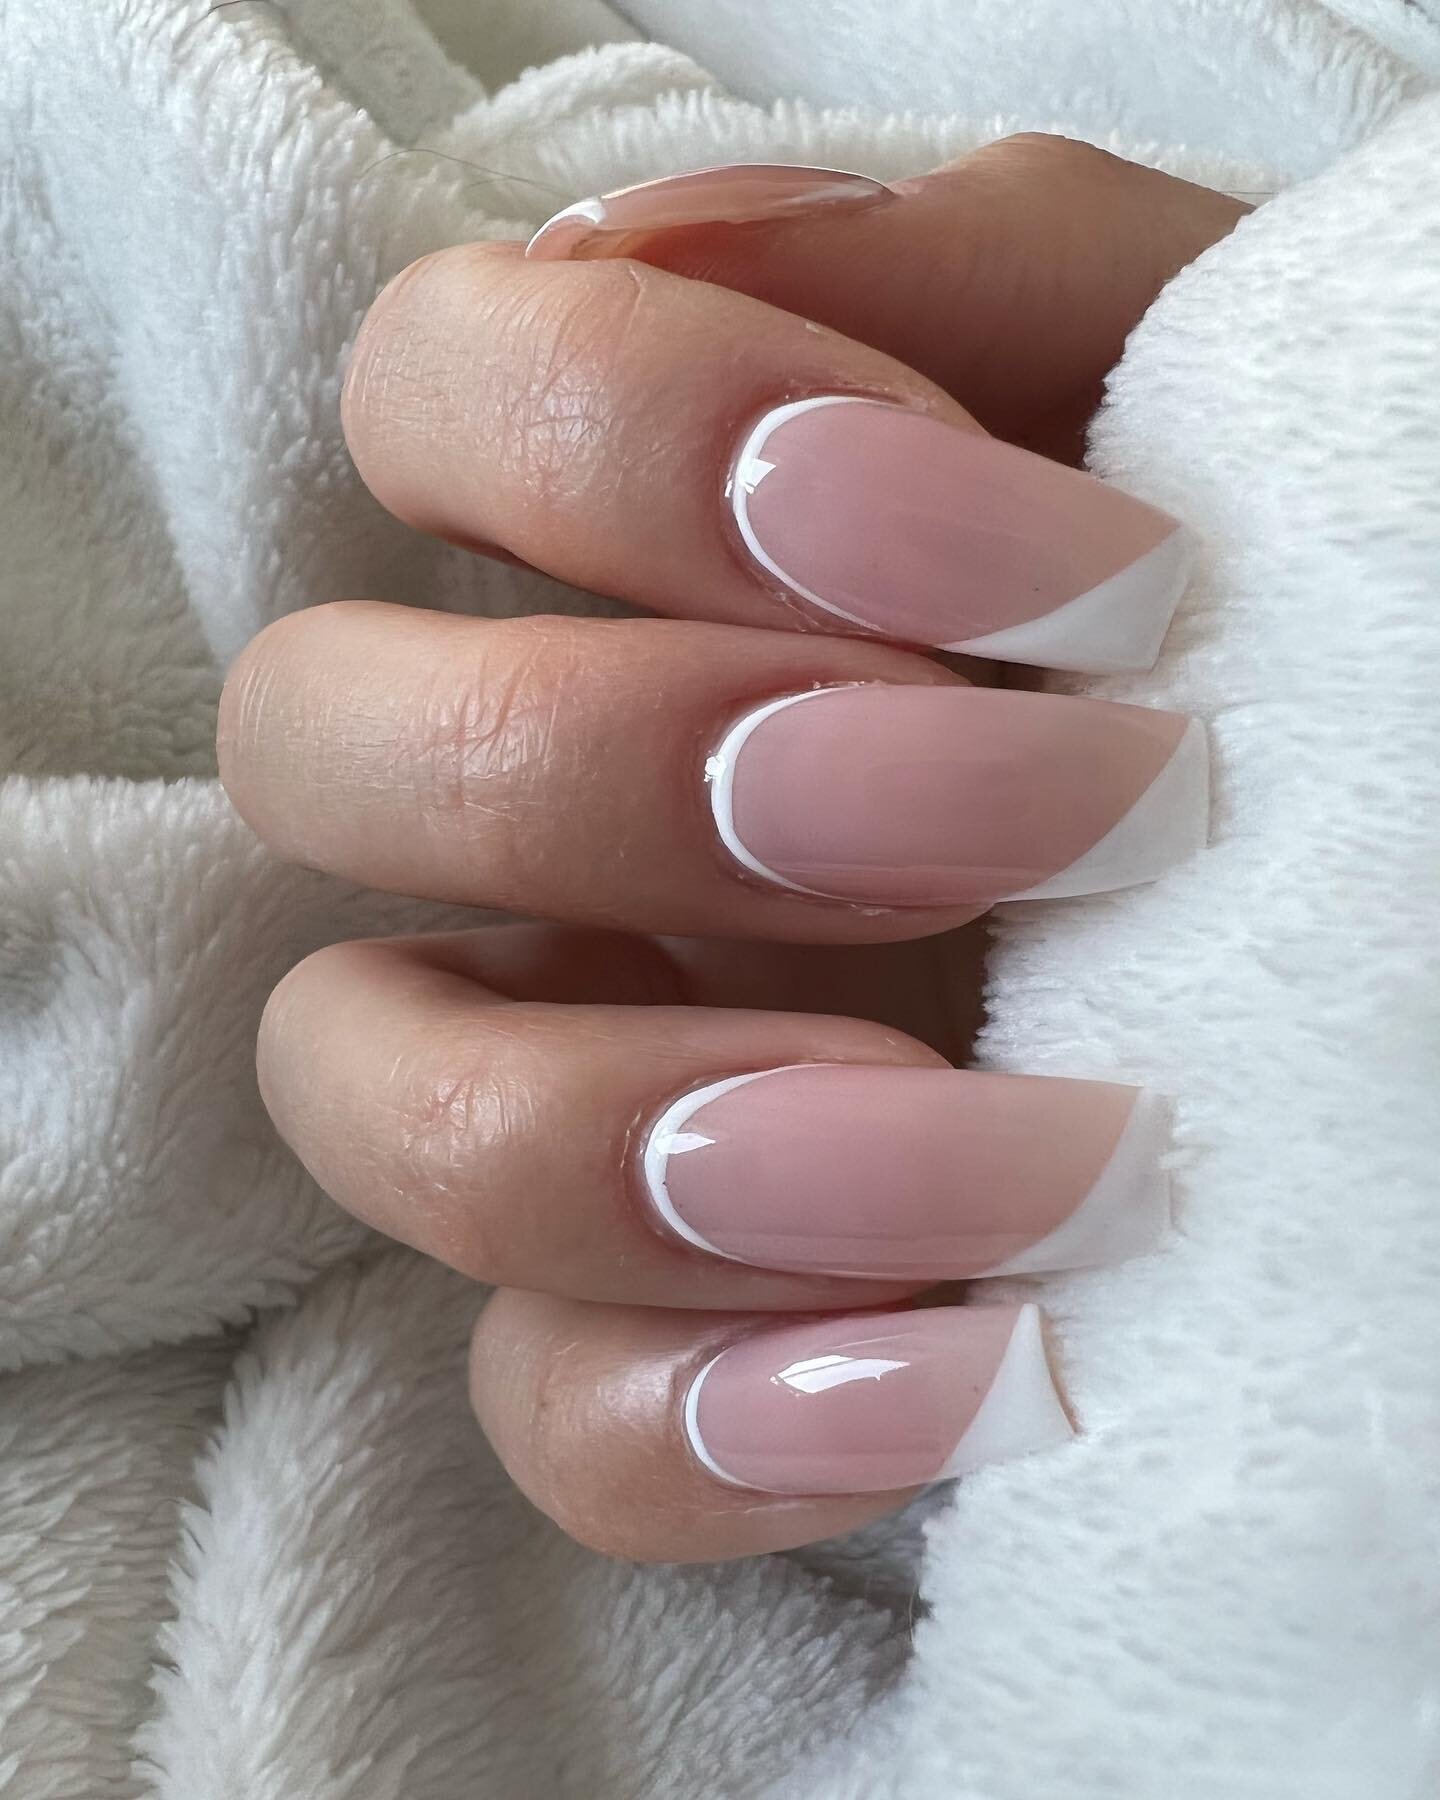 𝒫𝓇𝑒𝓉𝓉𝓎 𝒾𝓃 𝒲𝒽𝒾𝓉𝑒 🤍

🎄 As the holiday season approaches we encourage all of you to book ahead to avoid disapointments. 
We will always try our best to accommodate 💅✨

Online Bookings available, link in BIO ⬆️⬆️ or www.LuxyNails.ca 

#wi